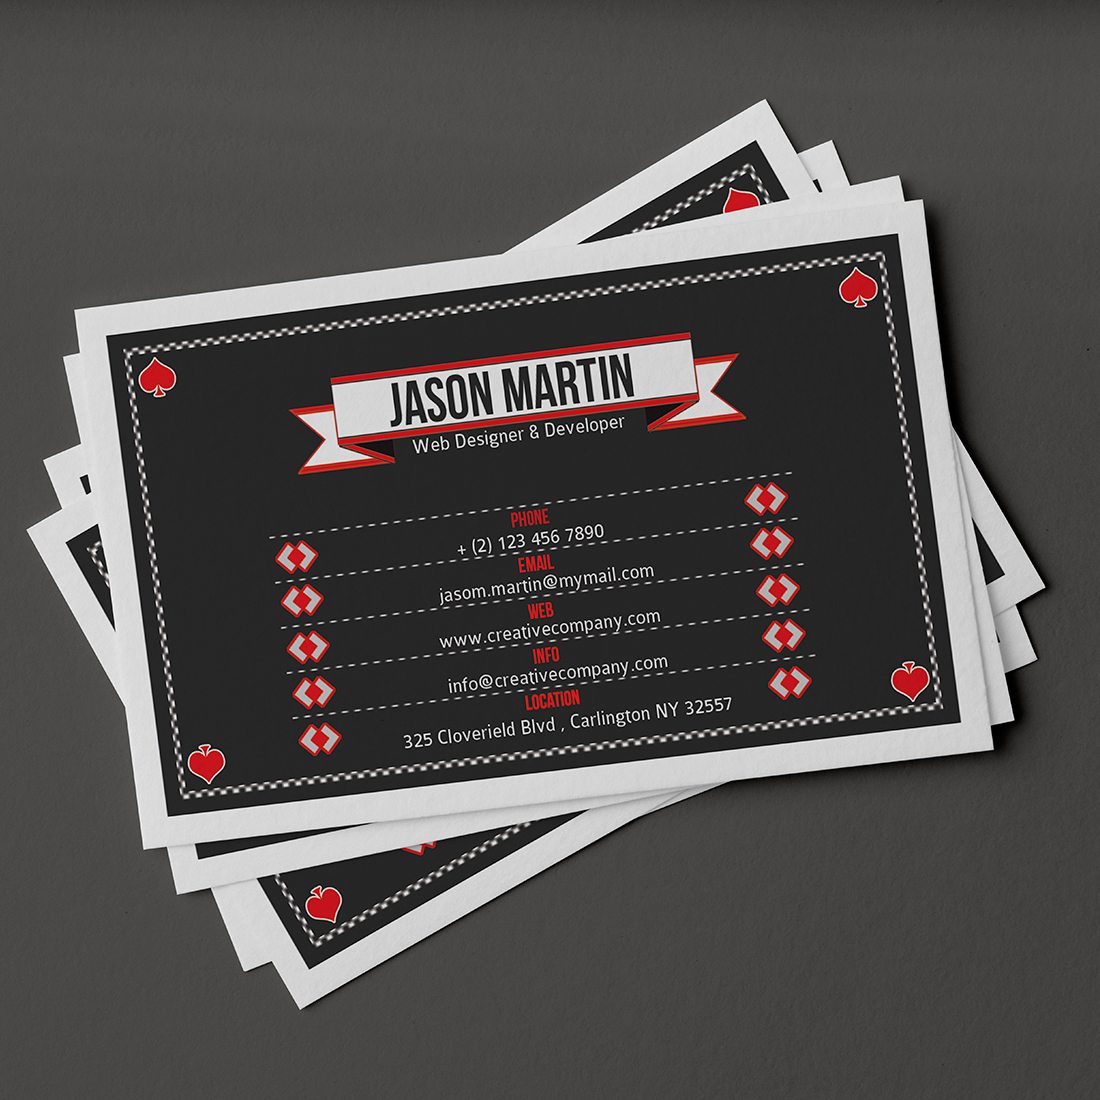 Simple Retro Style Business Card V01 facebook image.